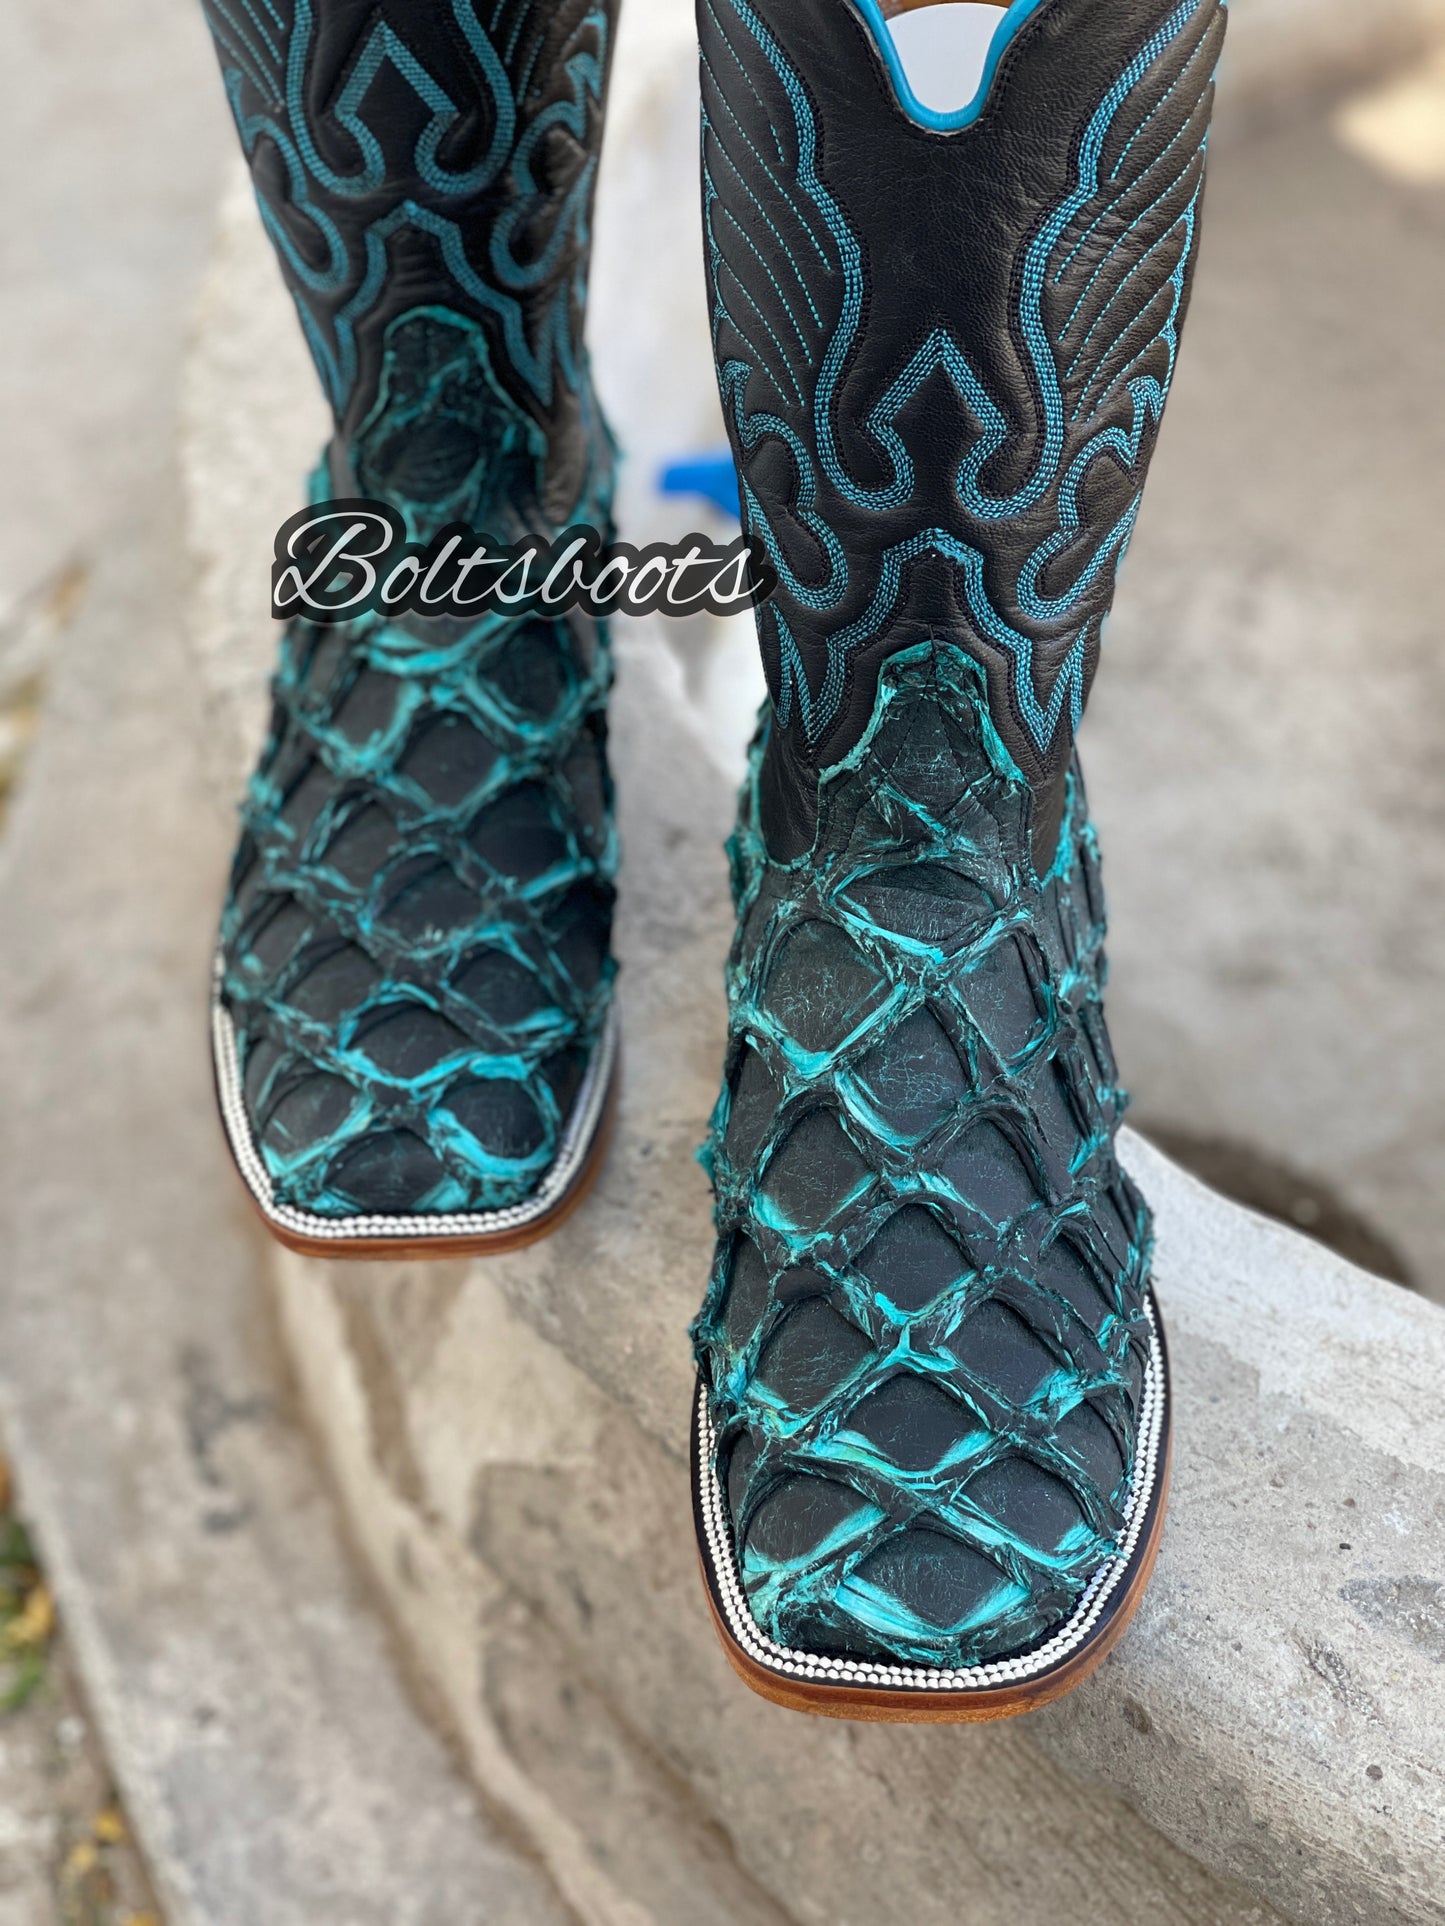 Moon 🌚 Turquise (( pirarucu Boltsboots collection)